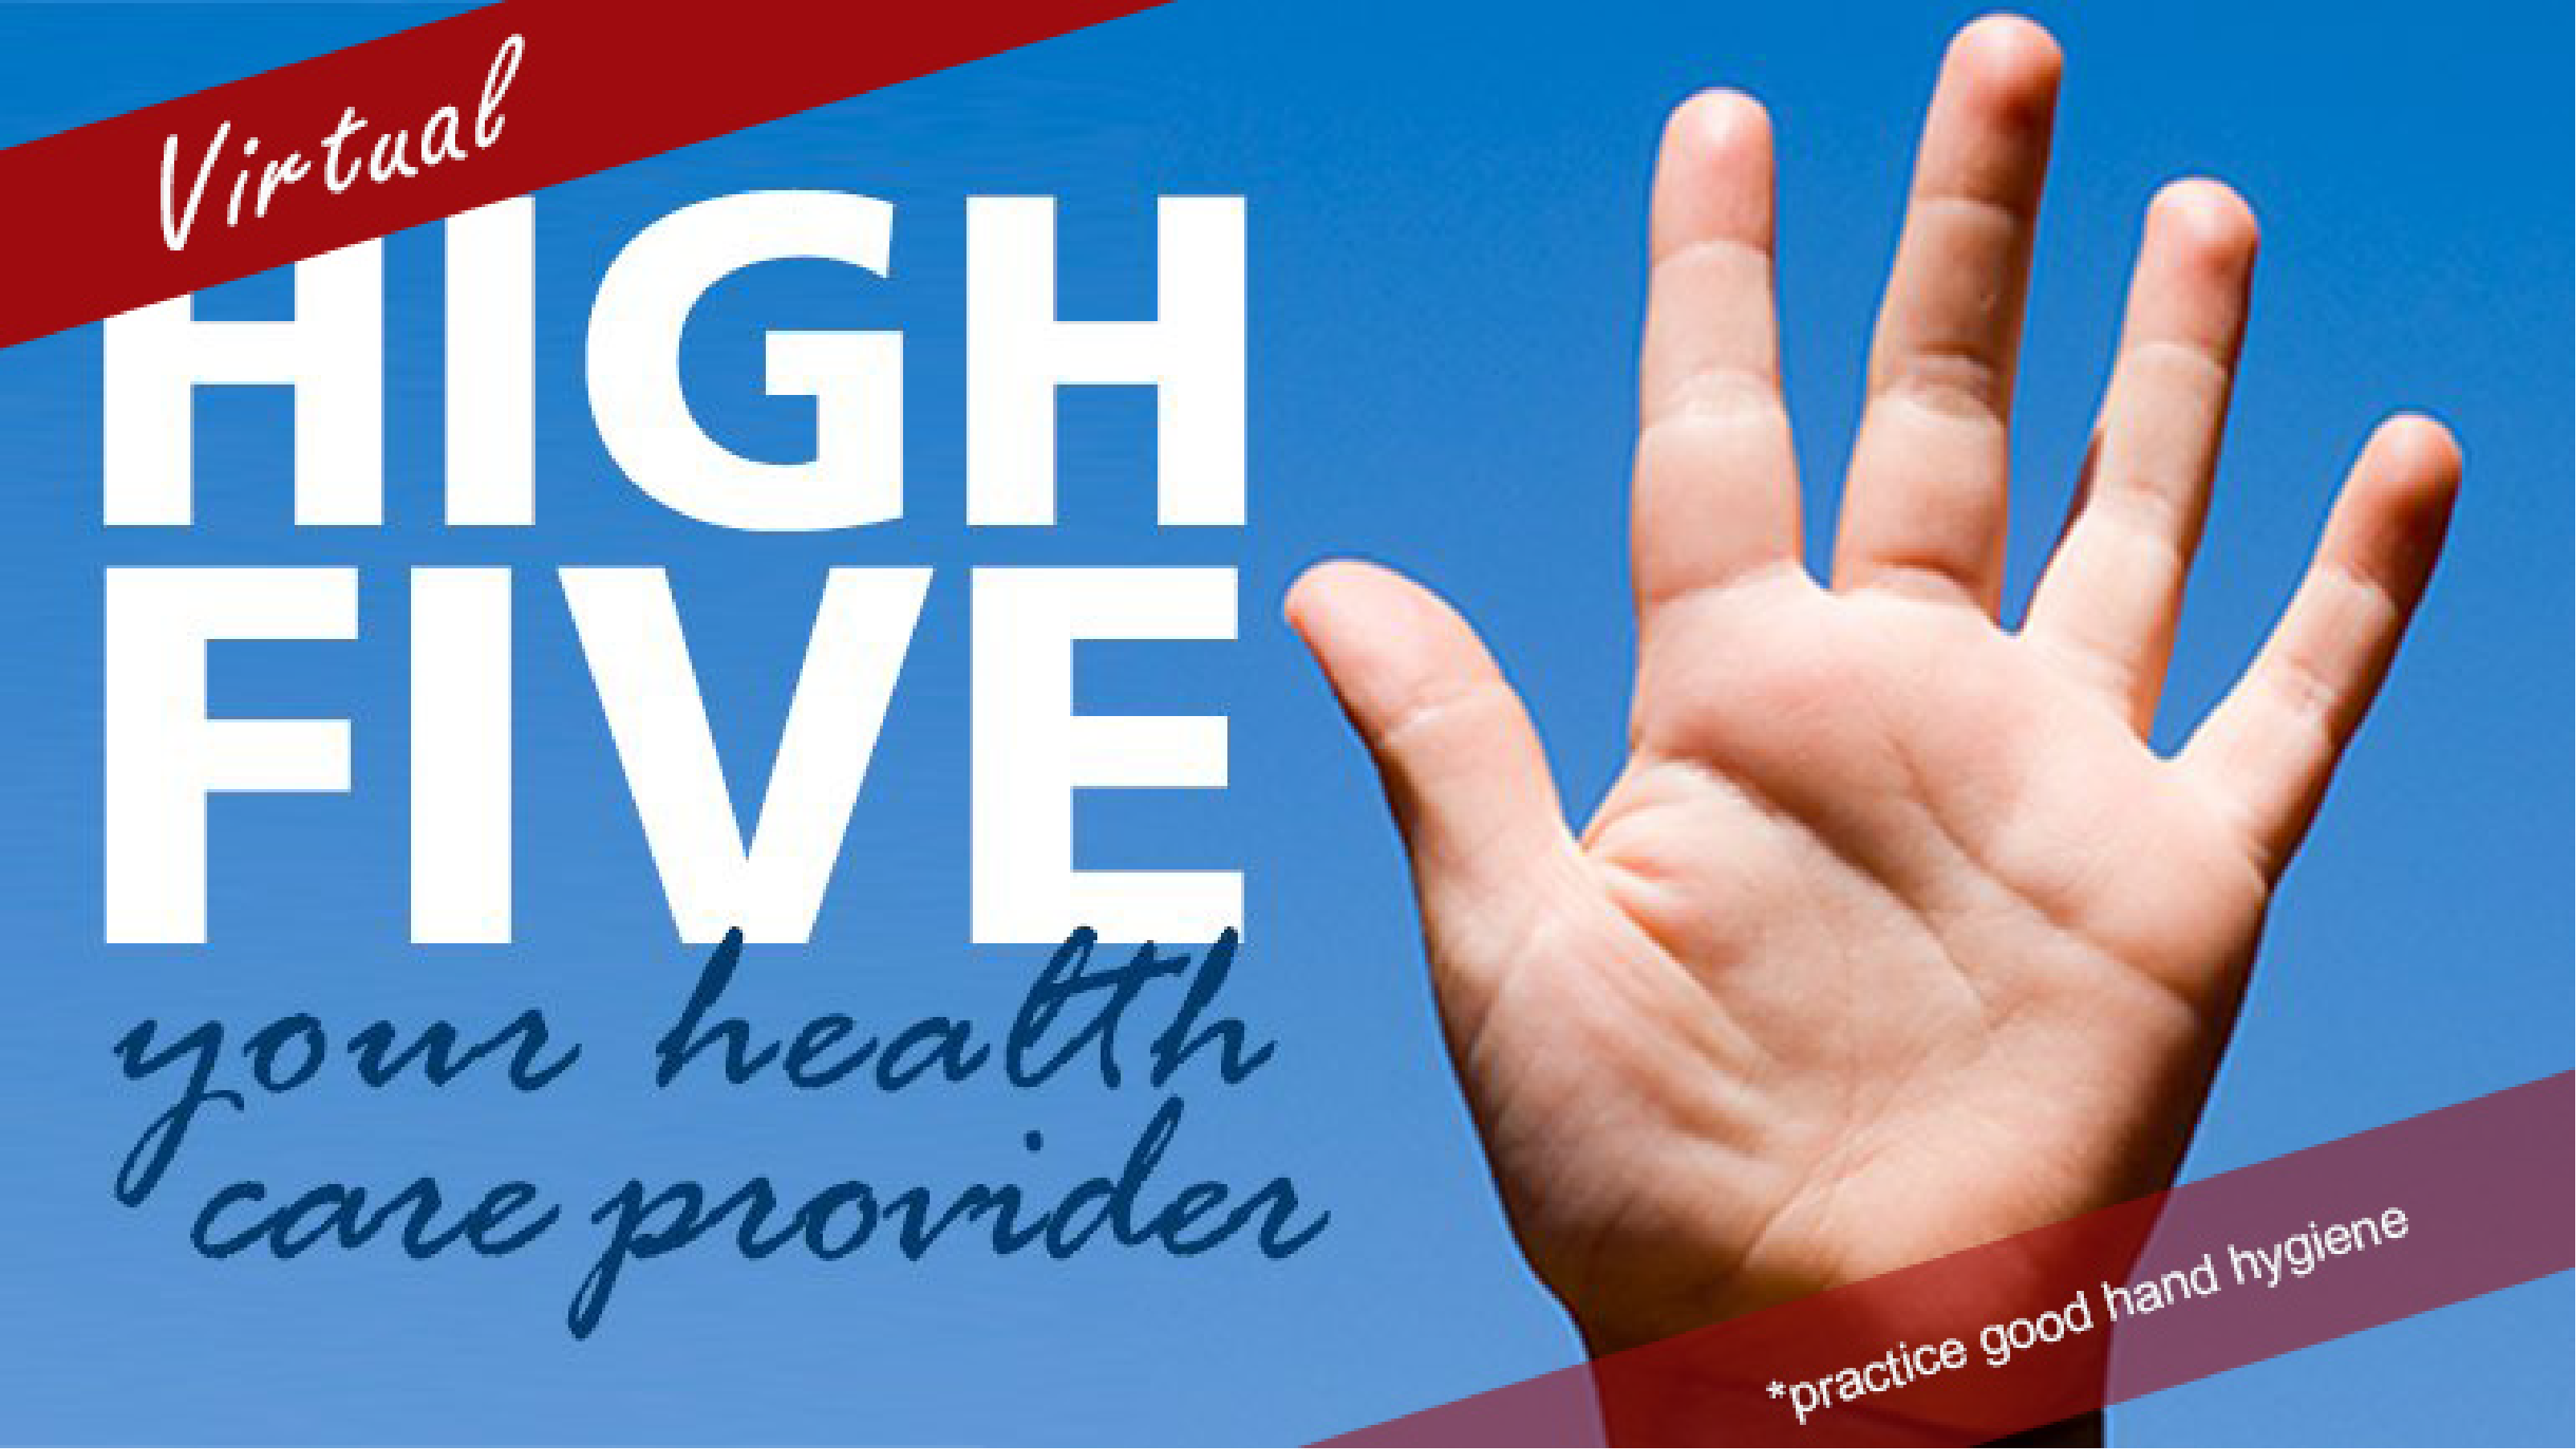 High five your health care provider graphic